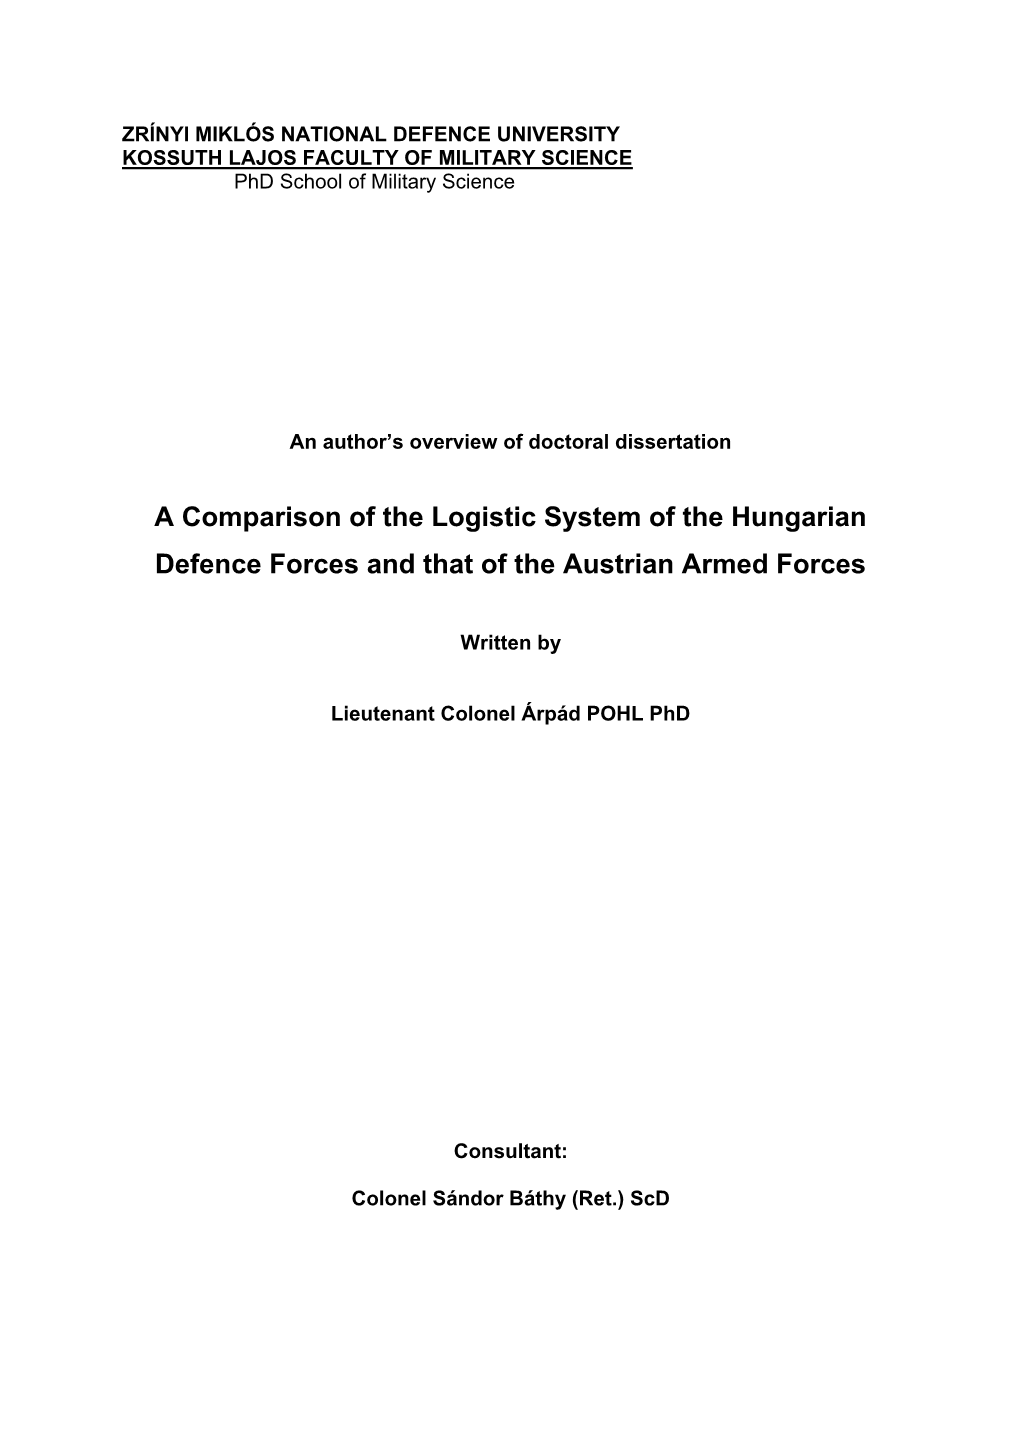 A Comparison of the Logistic System of the Hungarian Defence Forces and That of the Austrian Armed Forces